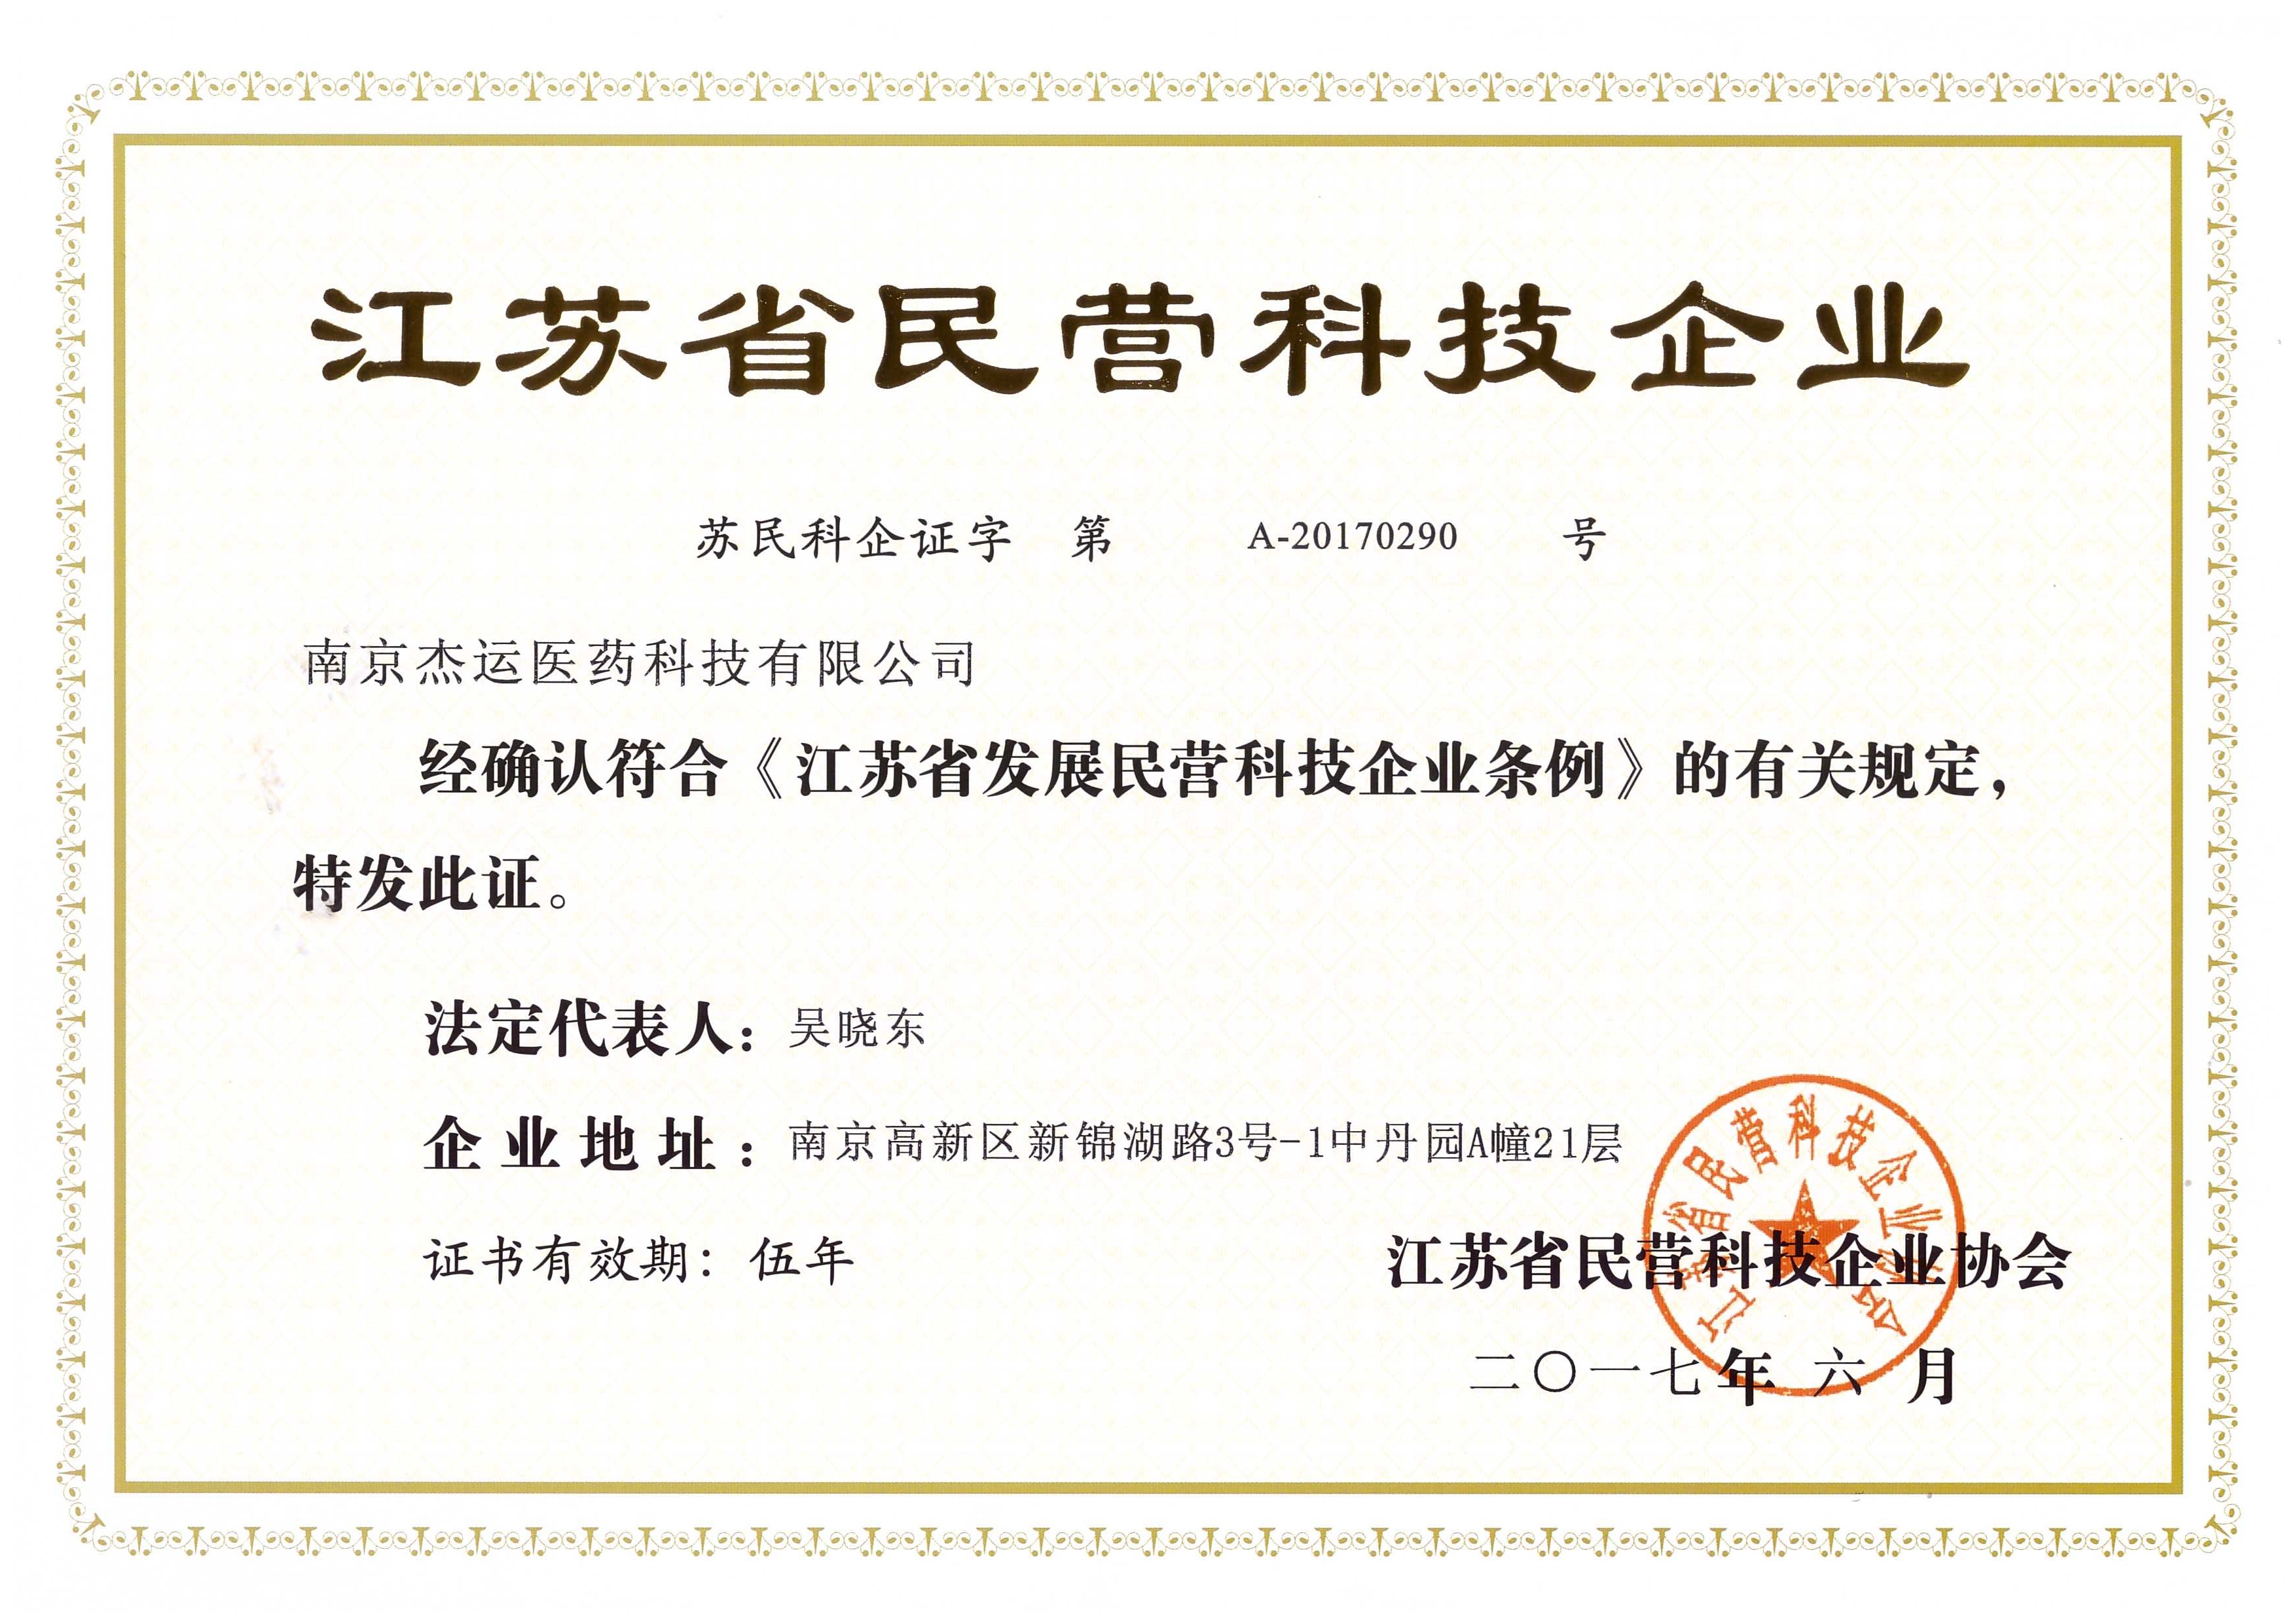 Our company has been awarded the title of private technology enterprise in Jiangsu Province